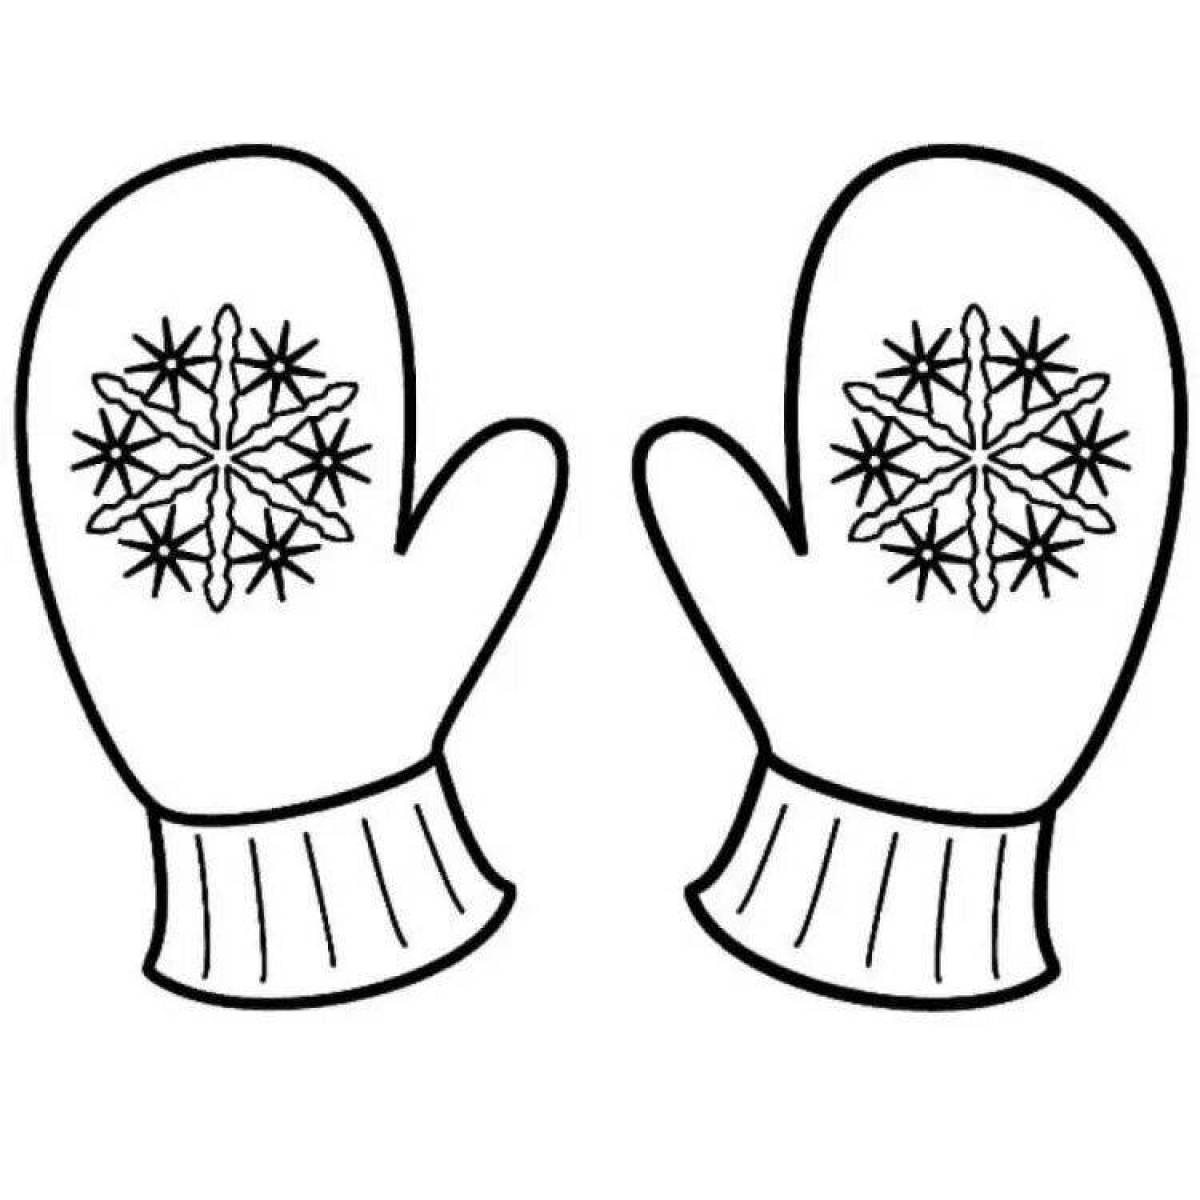 Coloring book shiny mitten